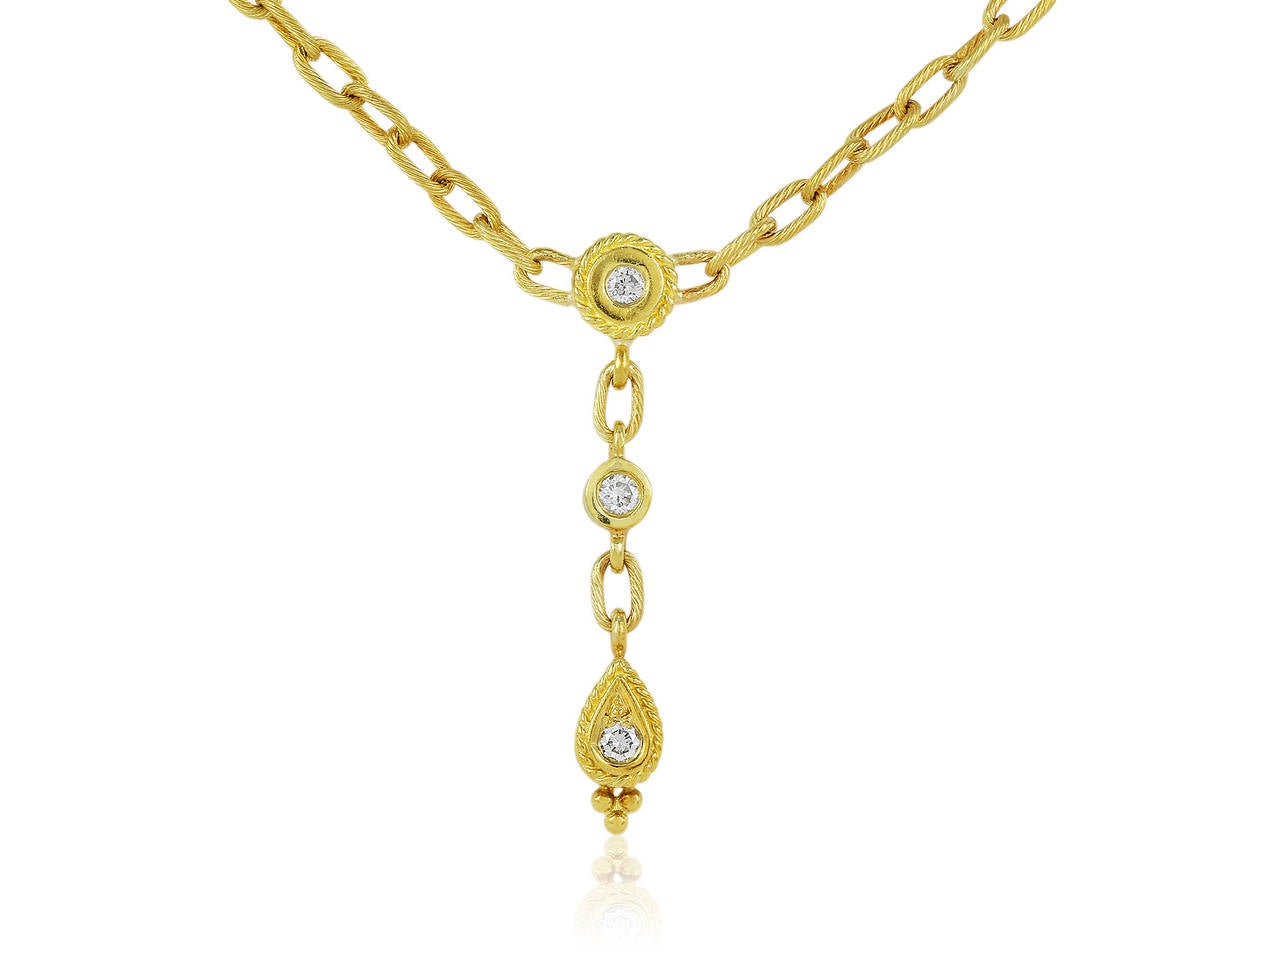 Penny Preville 18 karat yellow gold oval link chain necklace consisting of 3 circular stations and a pendant drop featuring a marquise shape, all accented with rope or decorative borders and a total of 7 full cut round diamonds.